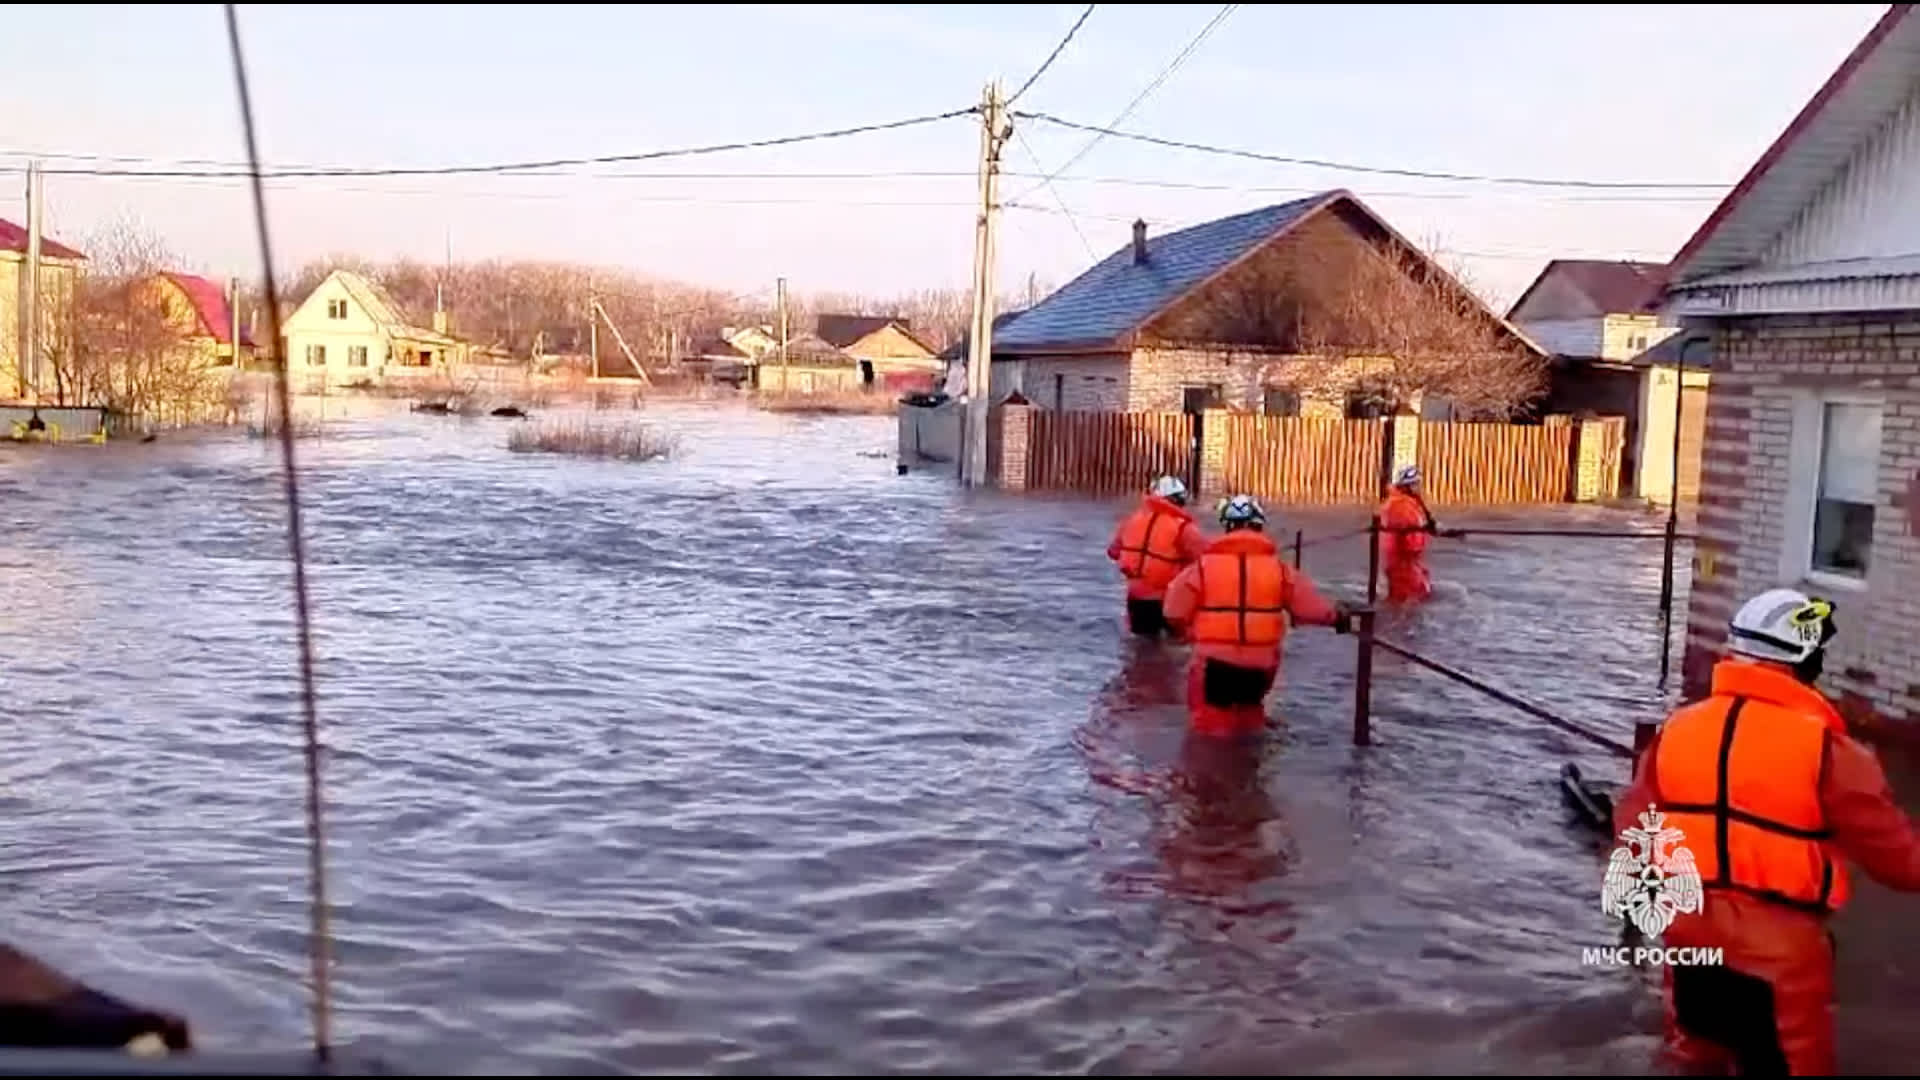 A screen grab captured from a video shows teams continuing to conduct an evacuation works for residents due to flooding after a dam burst in the city of Orsk, Russia on April 6, 2024.